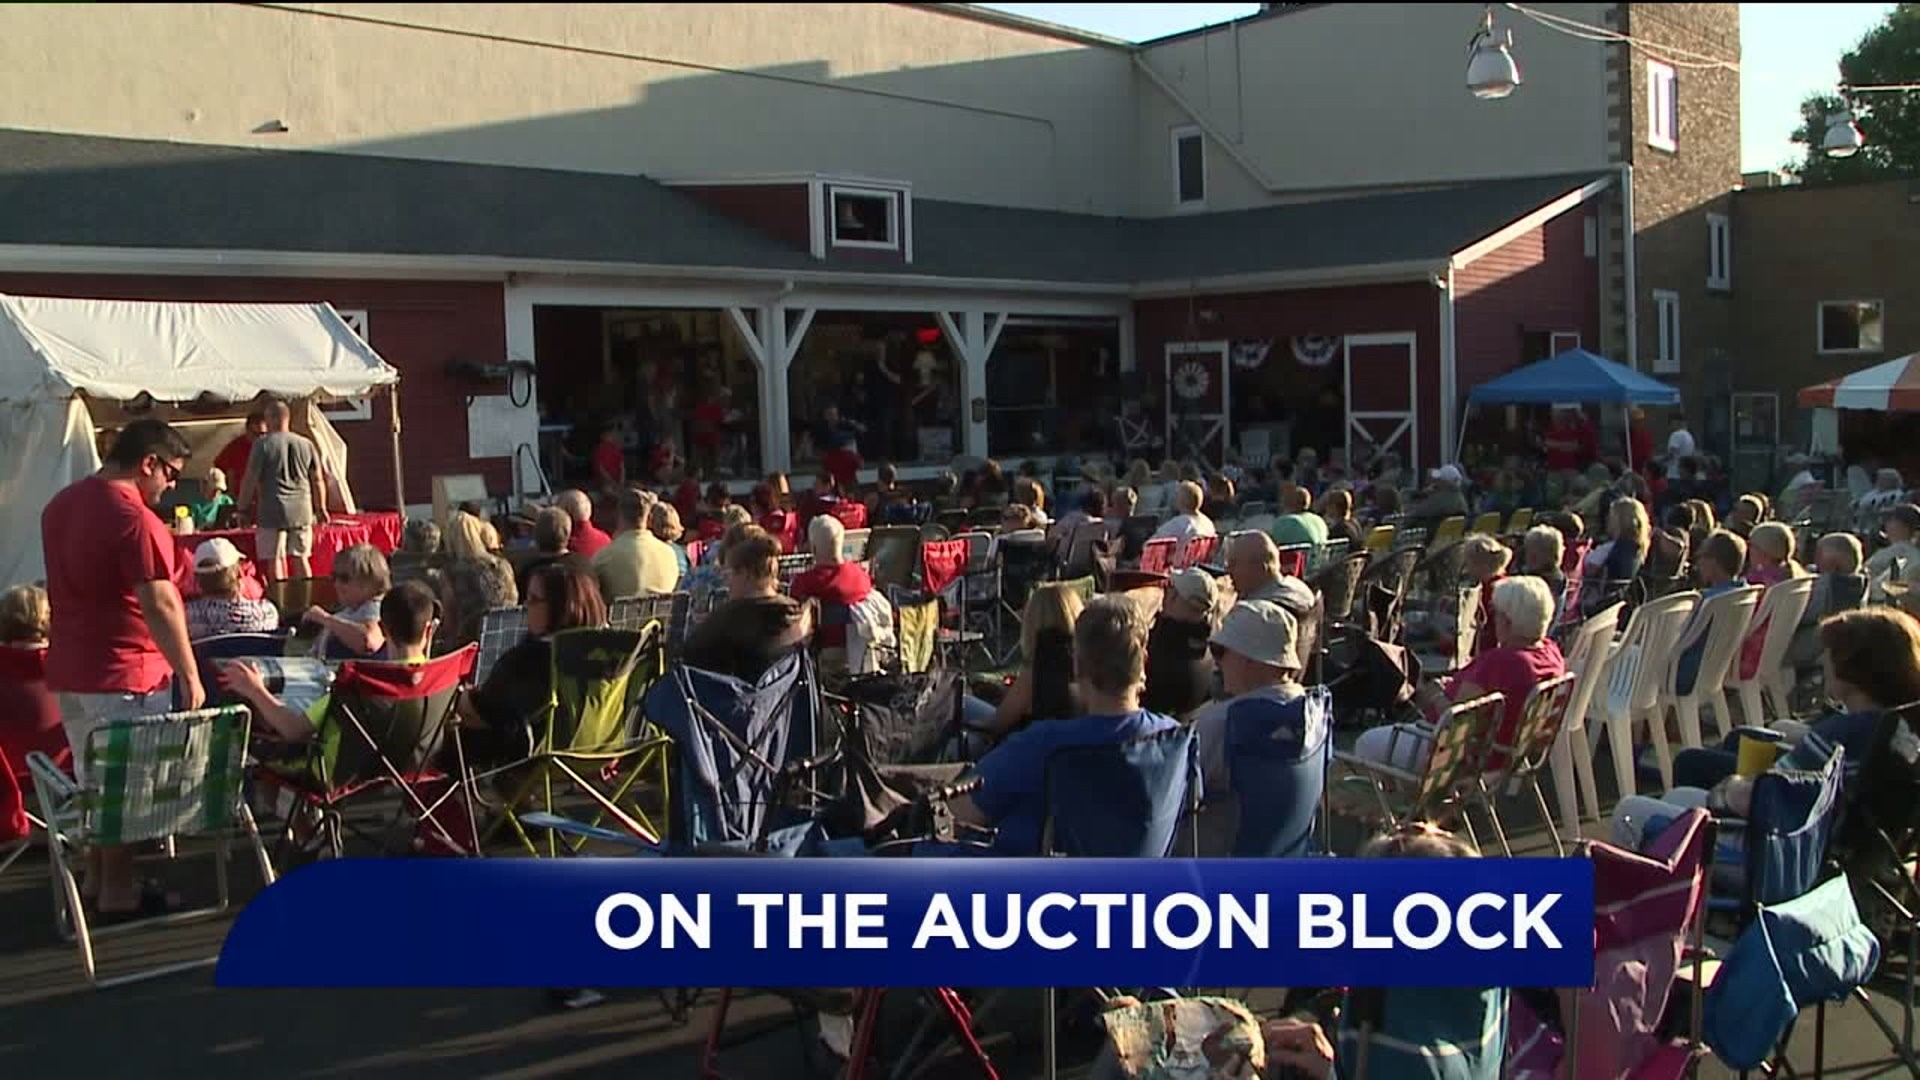 73rd Annual Back Mountain Memorial Library Auction in Full Swing